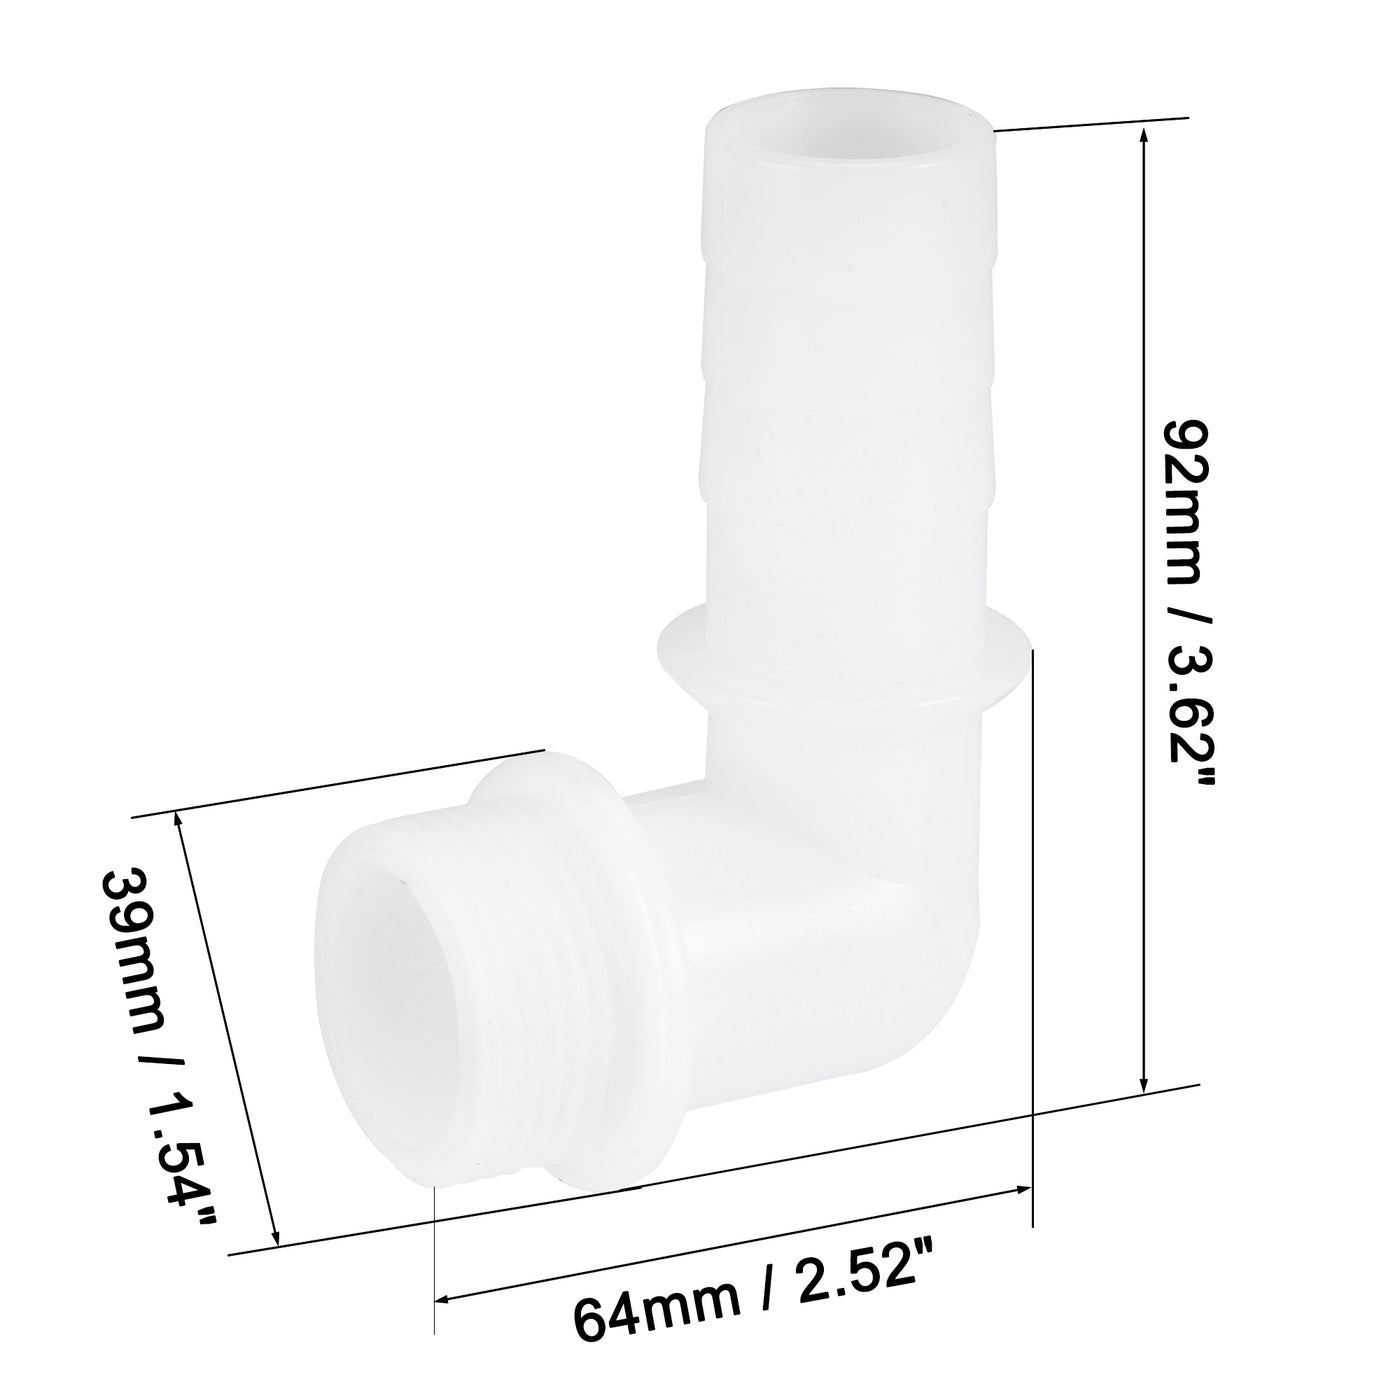 uxcell Uxcell PVC Tube Fitting 90 Degree Elbow Adapter 25mm Barbed x G1 Male White for Aquariums, Water Tanks, Tubs, Pools 2Pcs